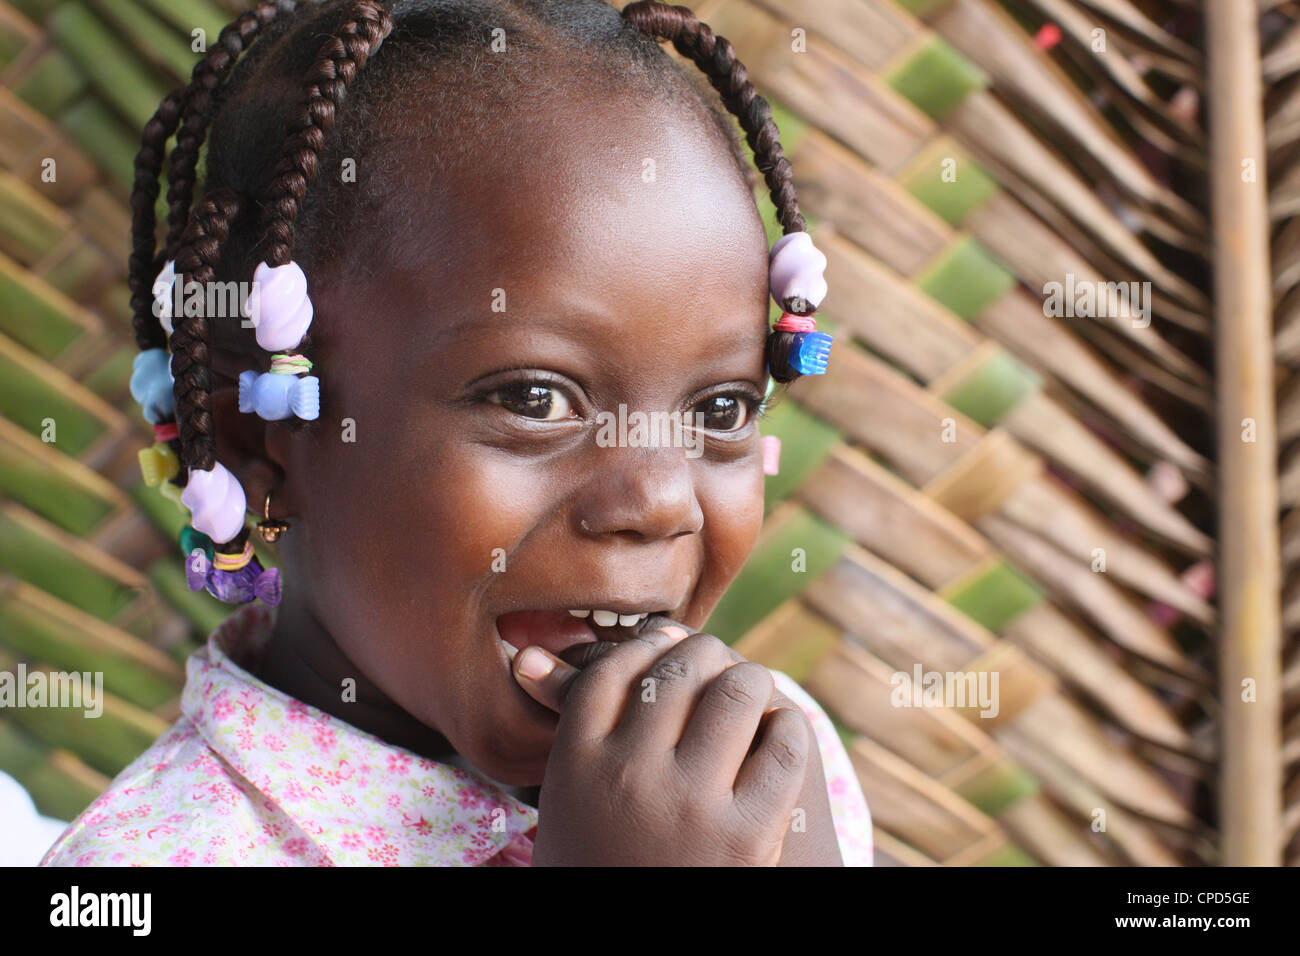 African Girl High Resolution Stock Photography and Images - Alamy